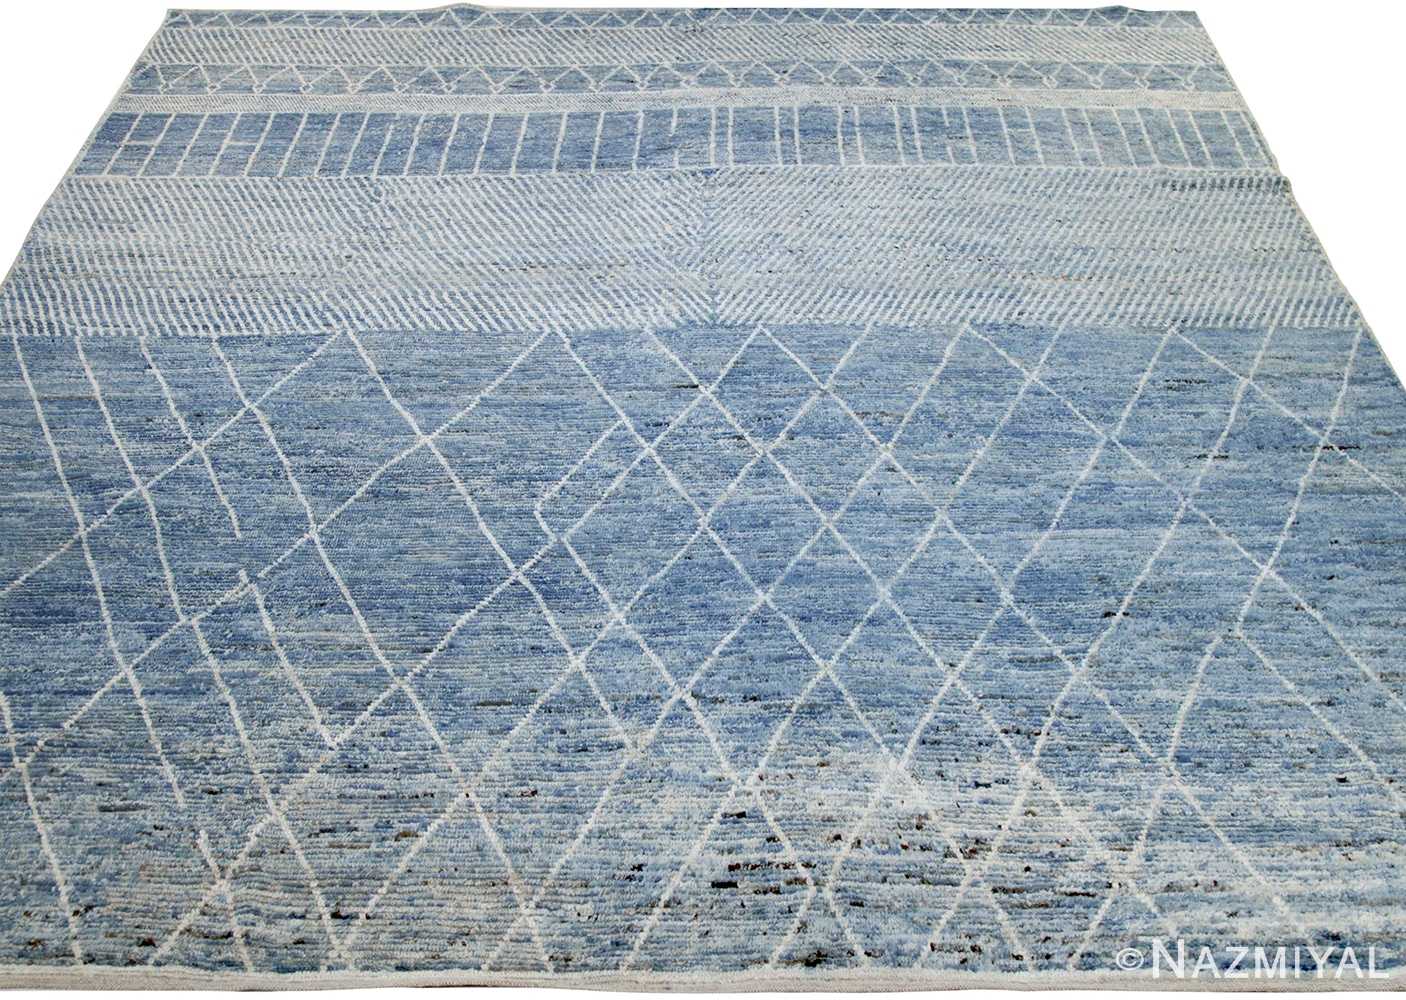 Whole View Of Blue Modern Moroccan Style Afghan Rug 60177 by Nazmiyal NYC